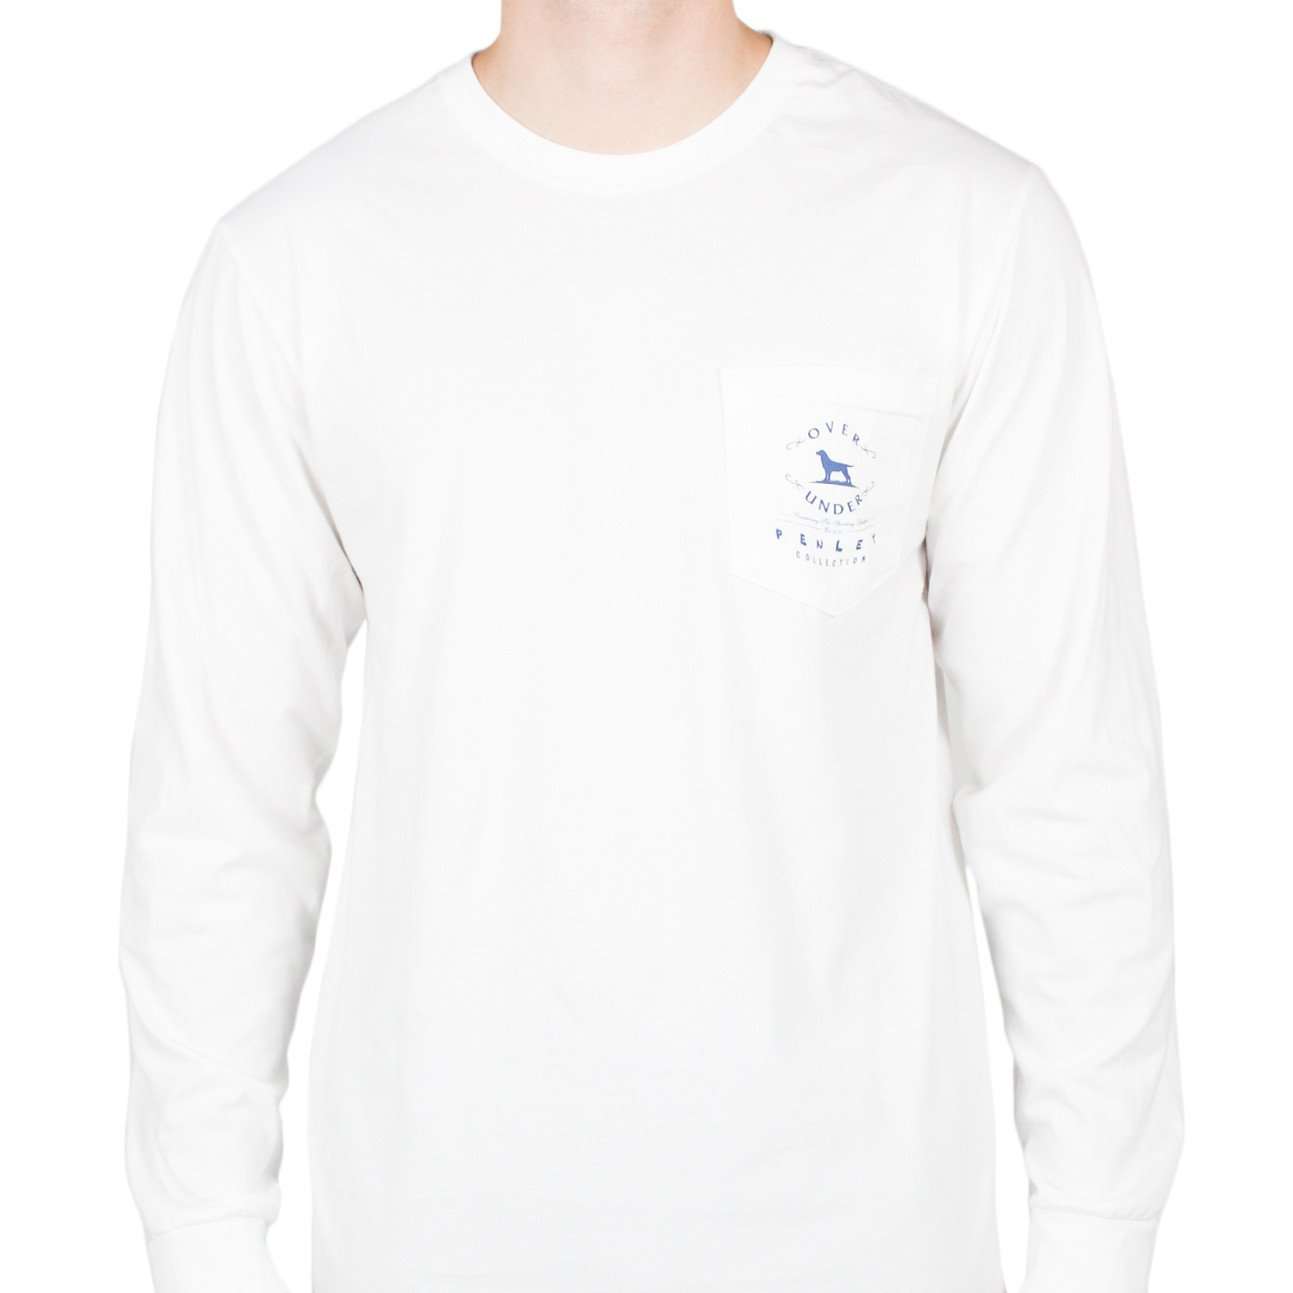 Stay True to Your Colors Long Sleeve Tee in White by Over Under Clothing - Country Club Prep